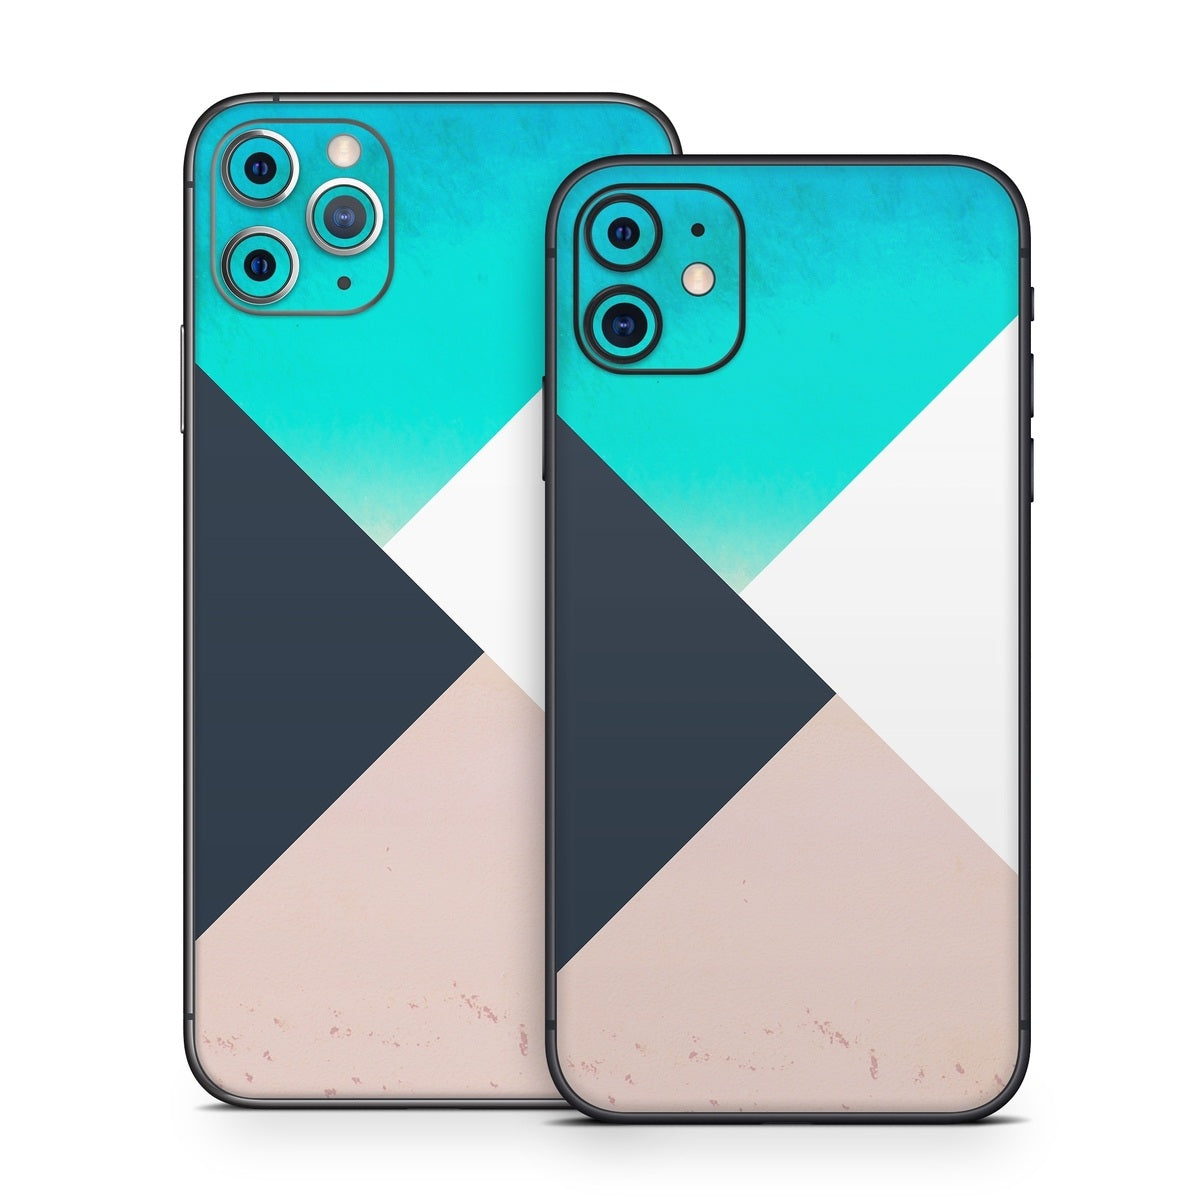 Currents - Apple iPhone 11 Skin